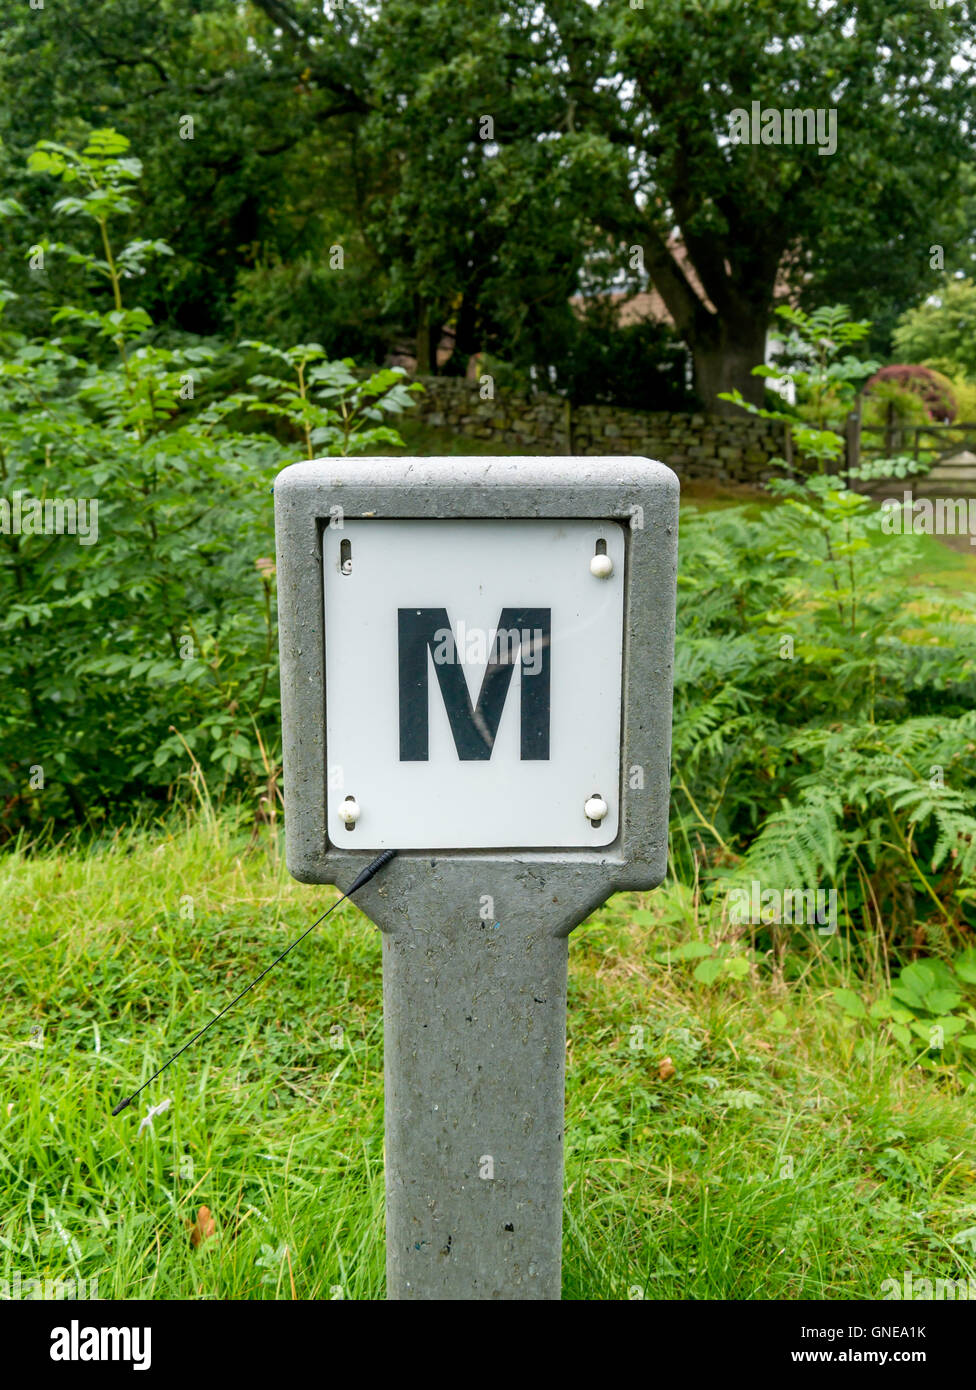 A roadside sign with a letter 'M' indicating the adjacent site of a water meter under a manhole in the road, Stock Photo